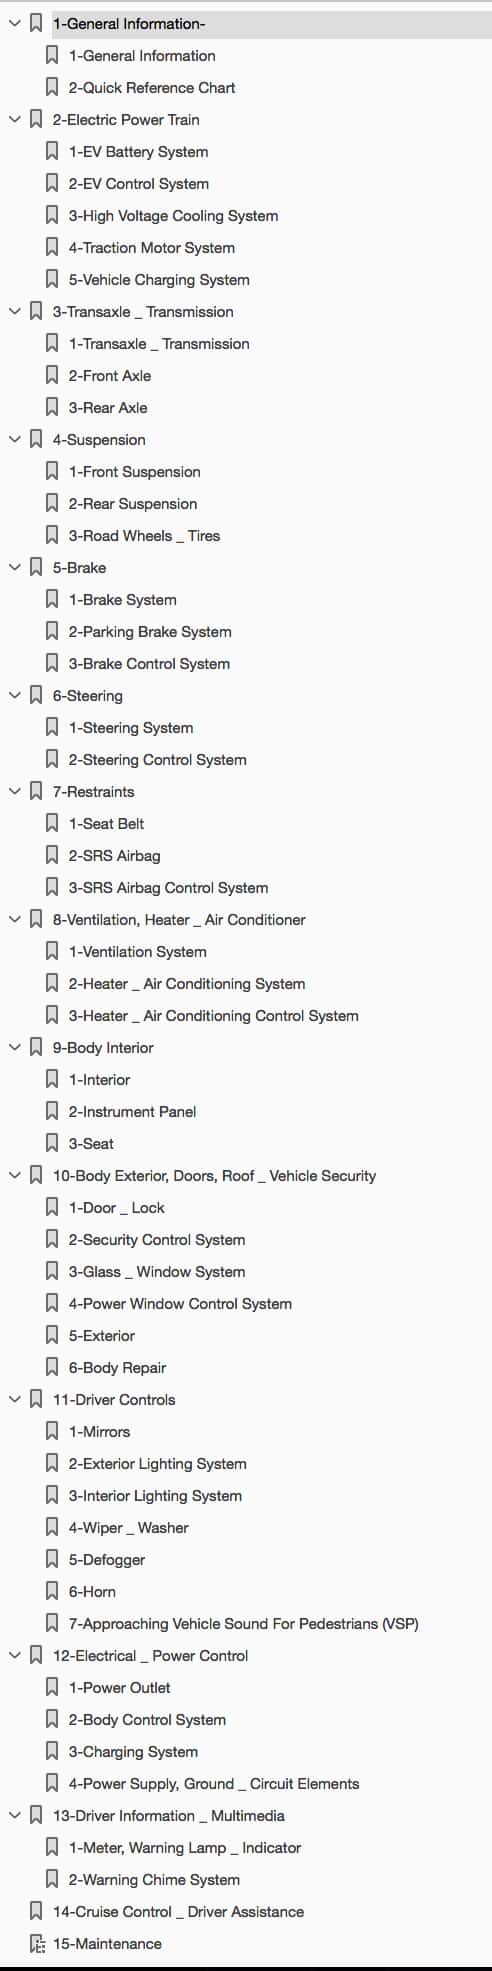 Table of Contents 2015-2017 Nissan Leaf Repair Manual